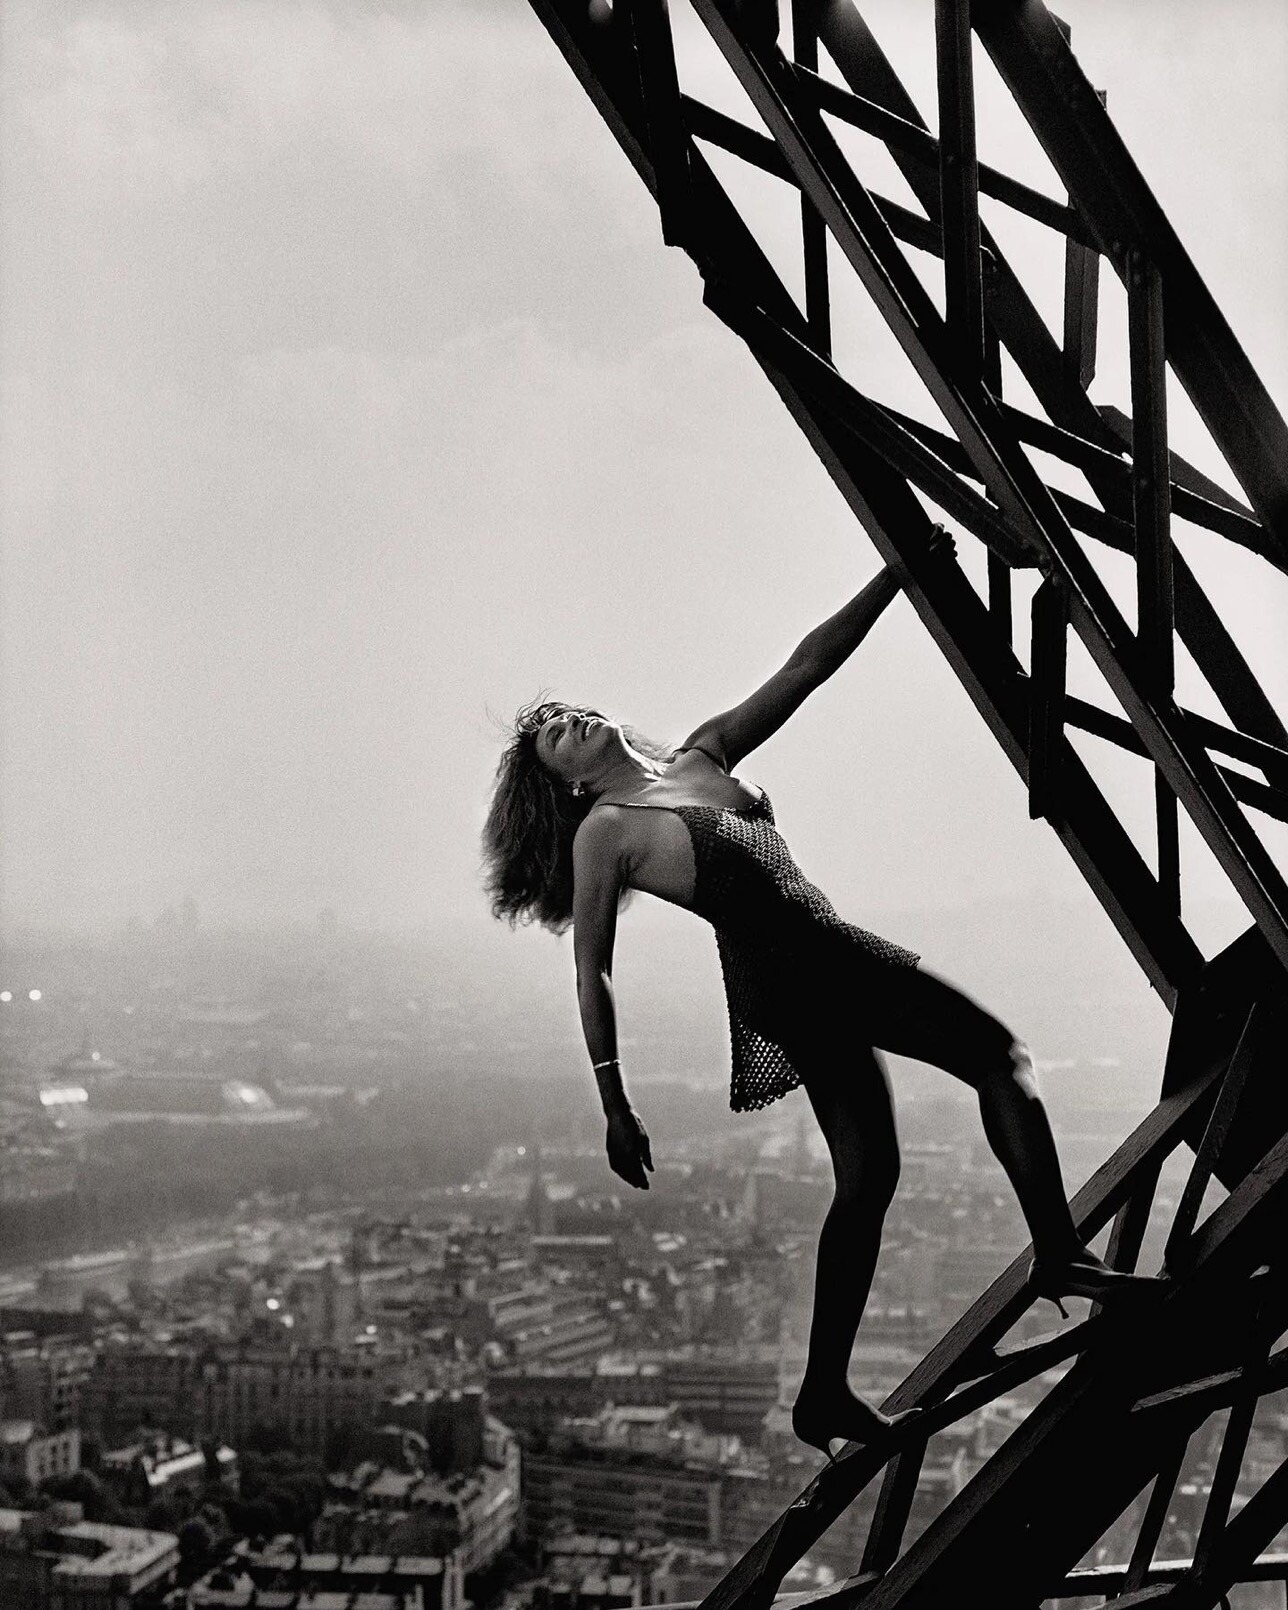 A black and white image of Tina Turner hanging from the Eiffel Tower by Peter Lindbergh